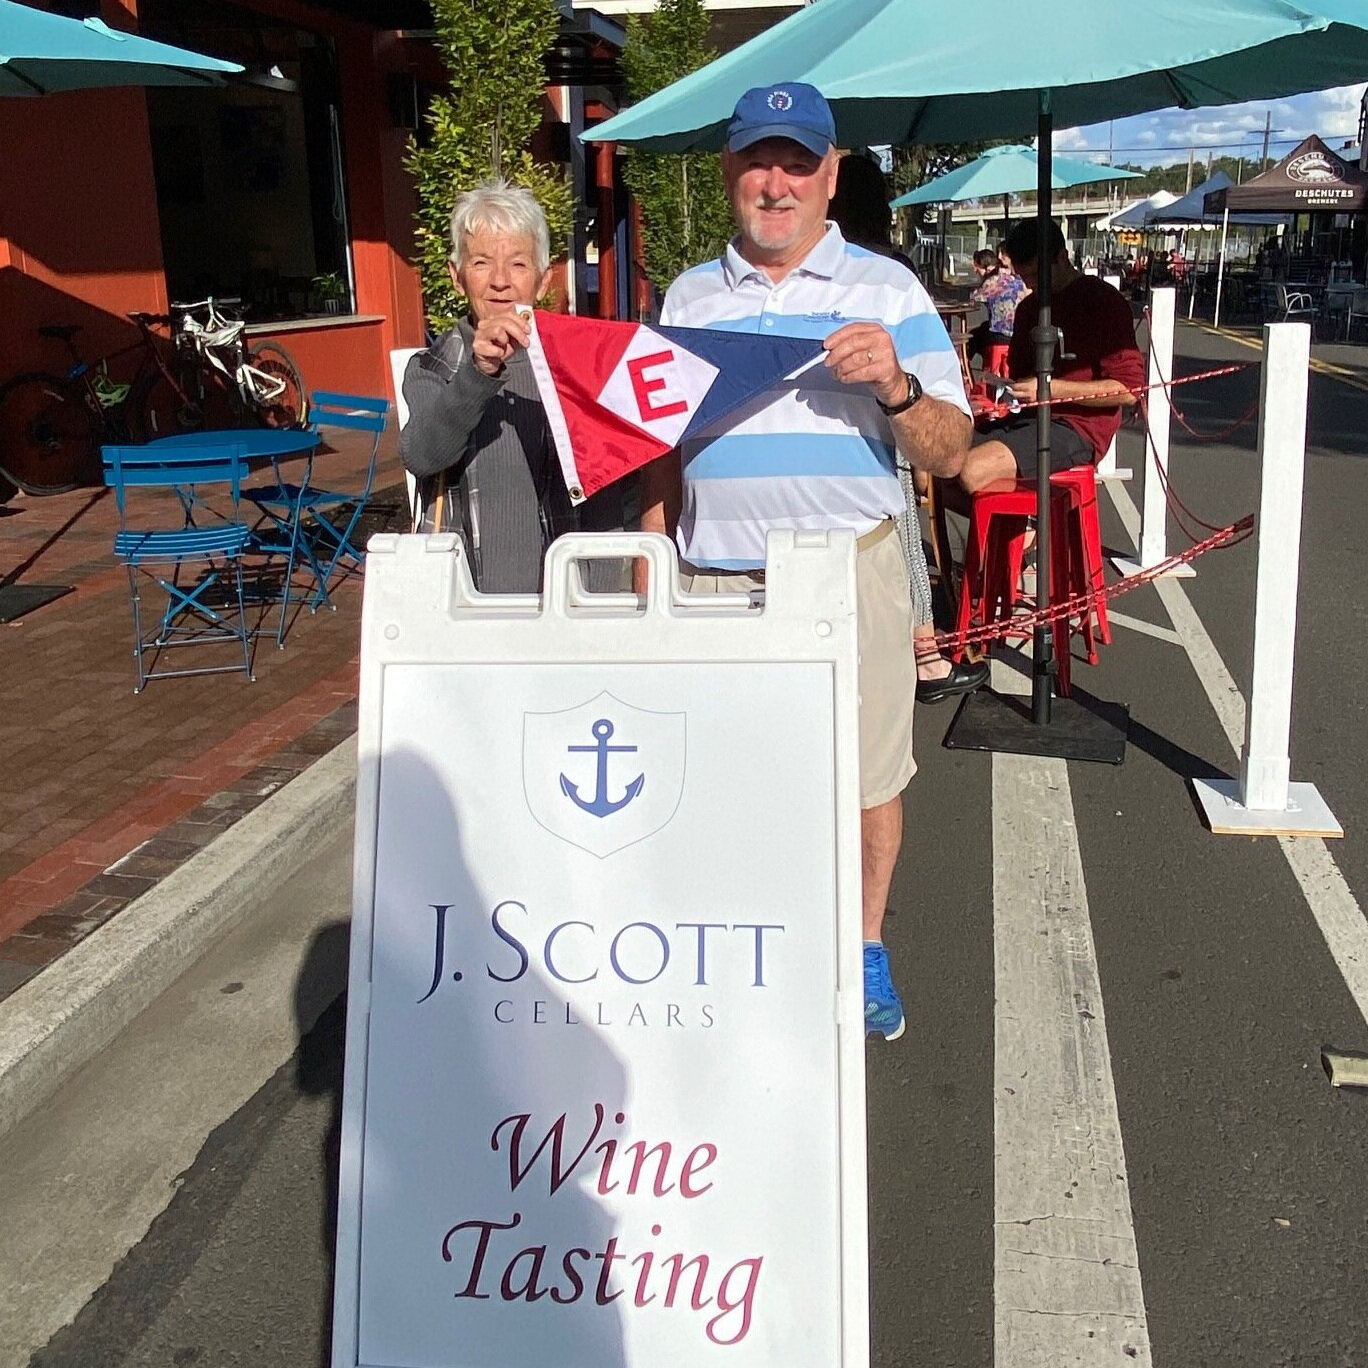  Bonnie &amp; Rex take their burgee out for a little wine tasting at J. Scott Cellars in Eugene 